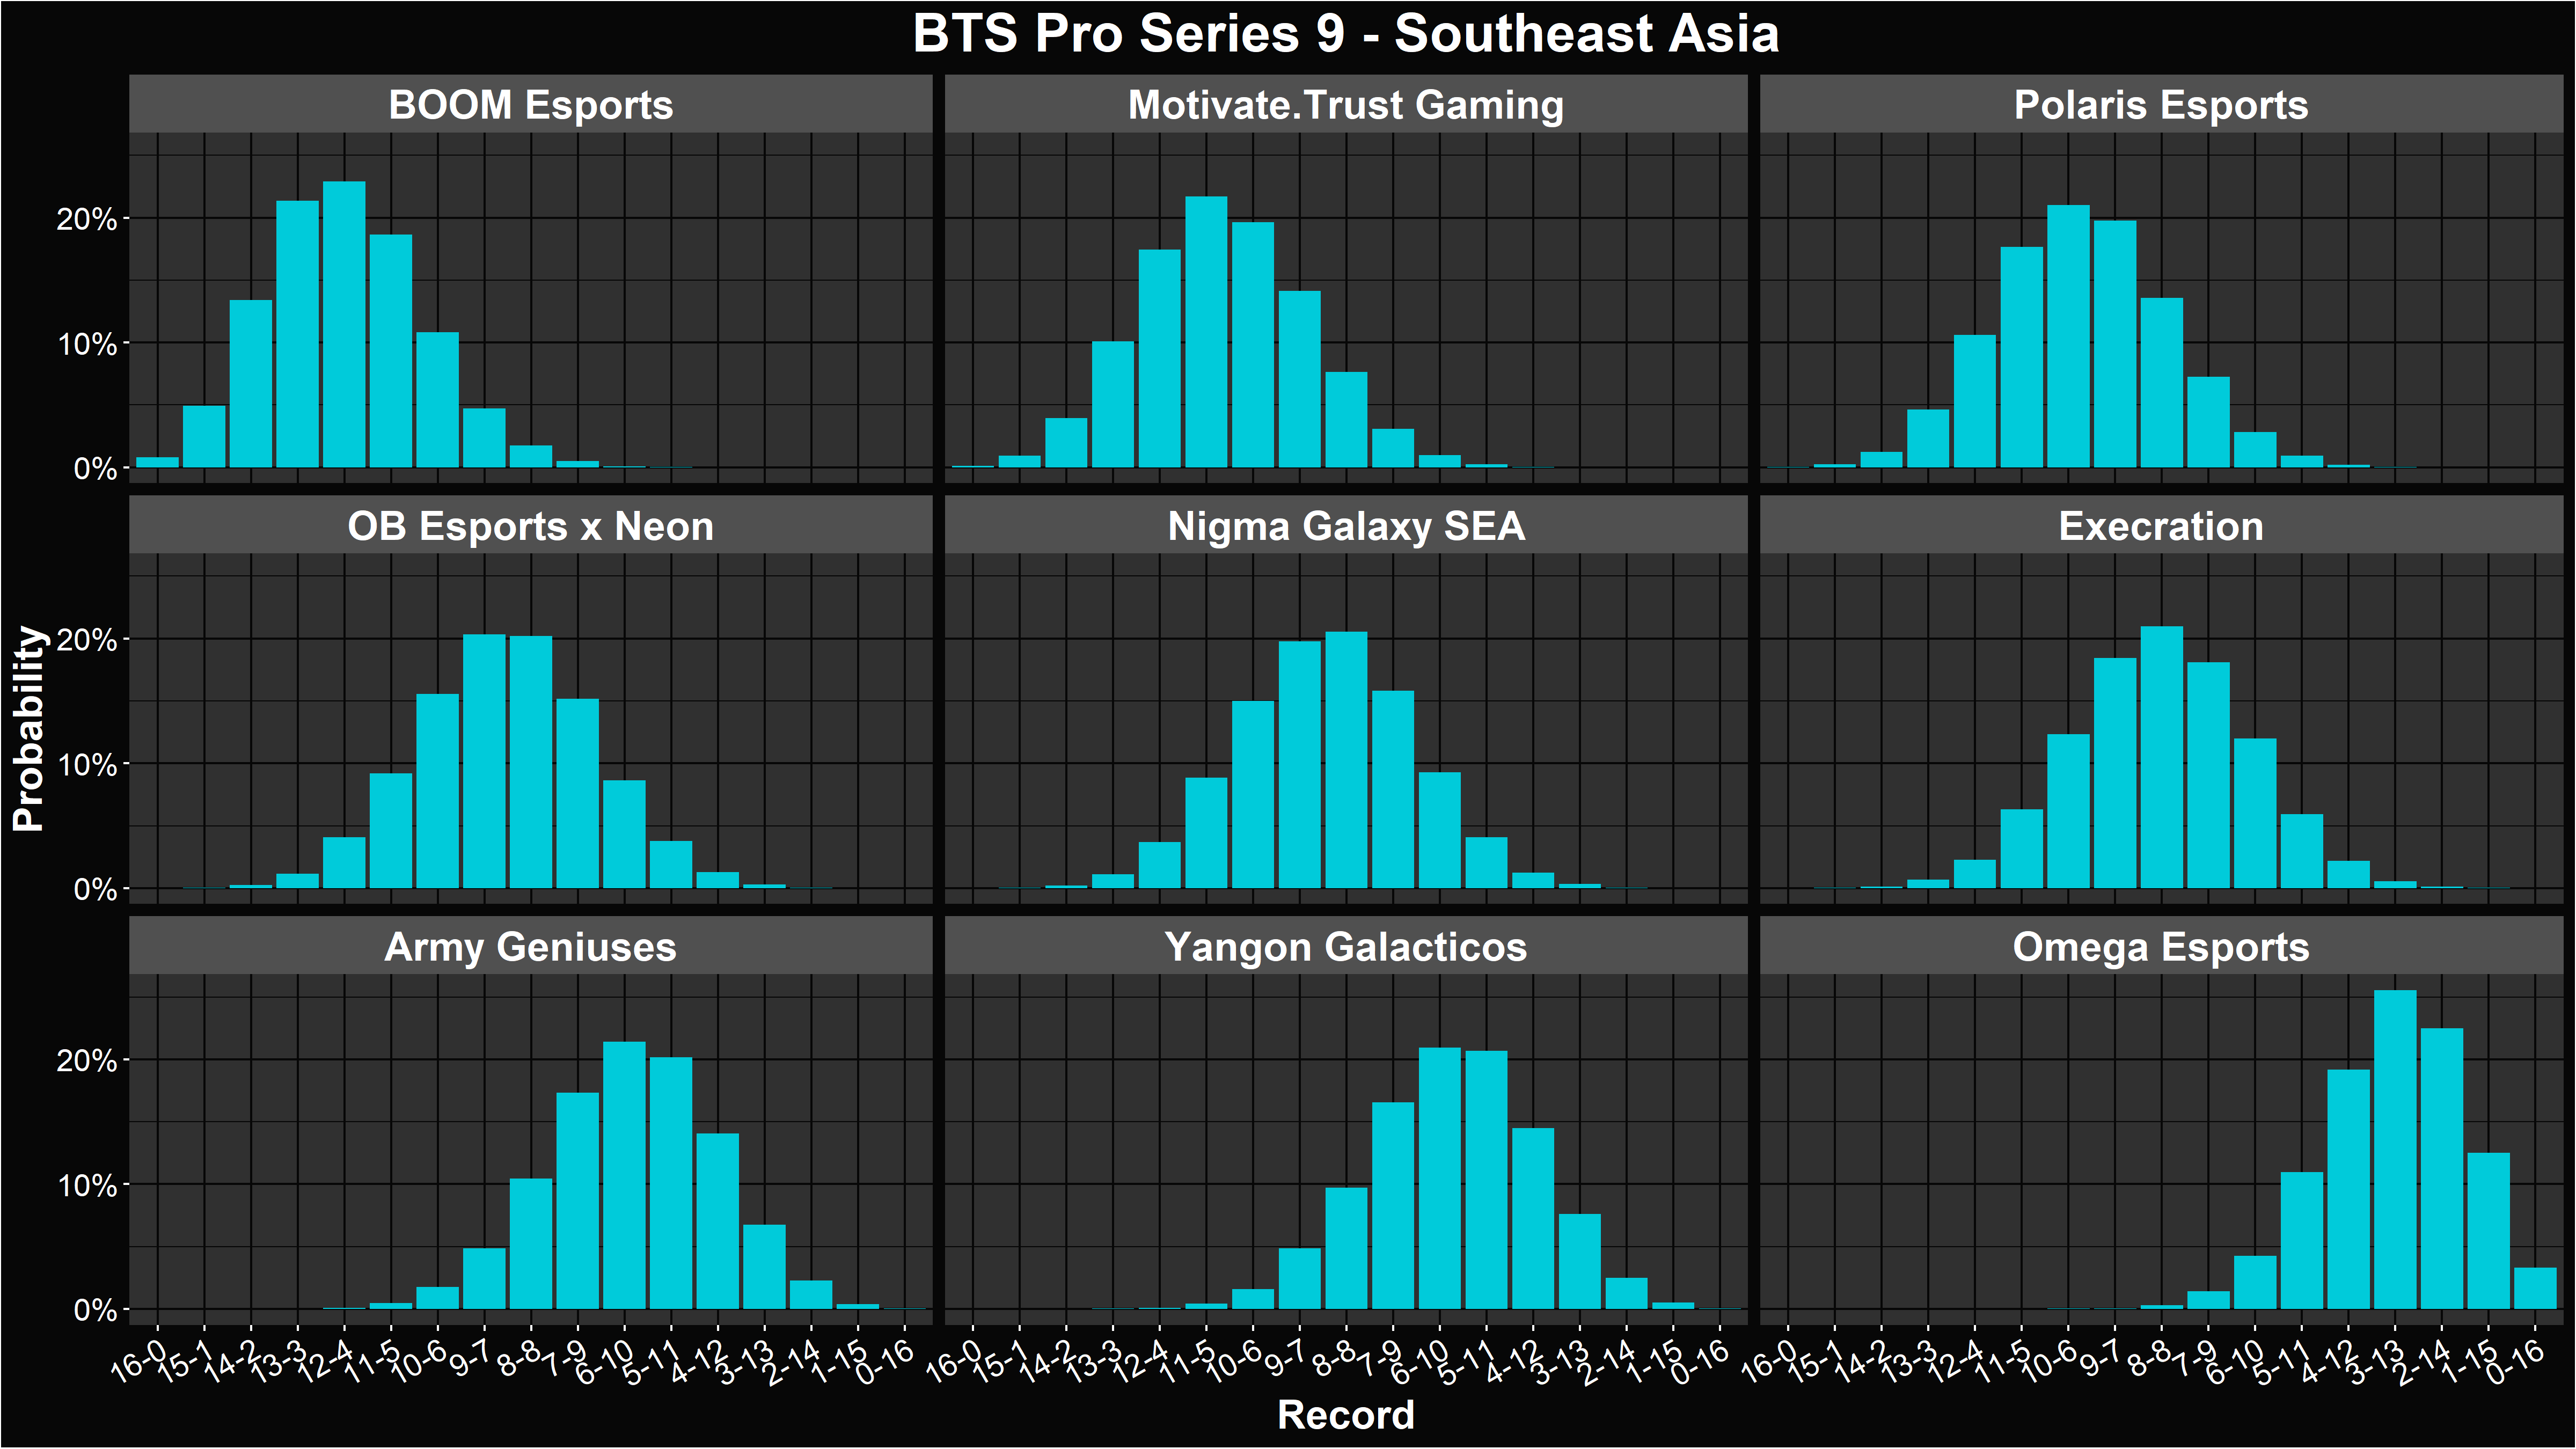 Alacrity's BTS Pro Series 9 Southeast Asia Group Stage Record Distributions